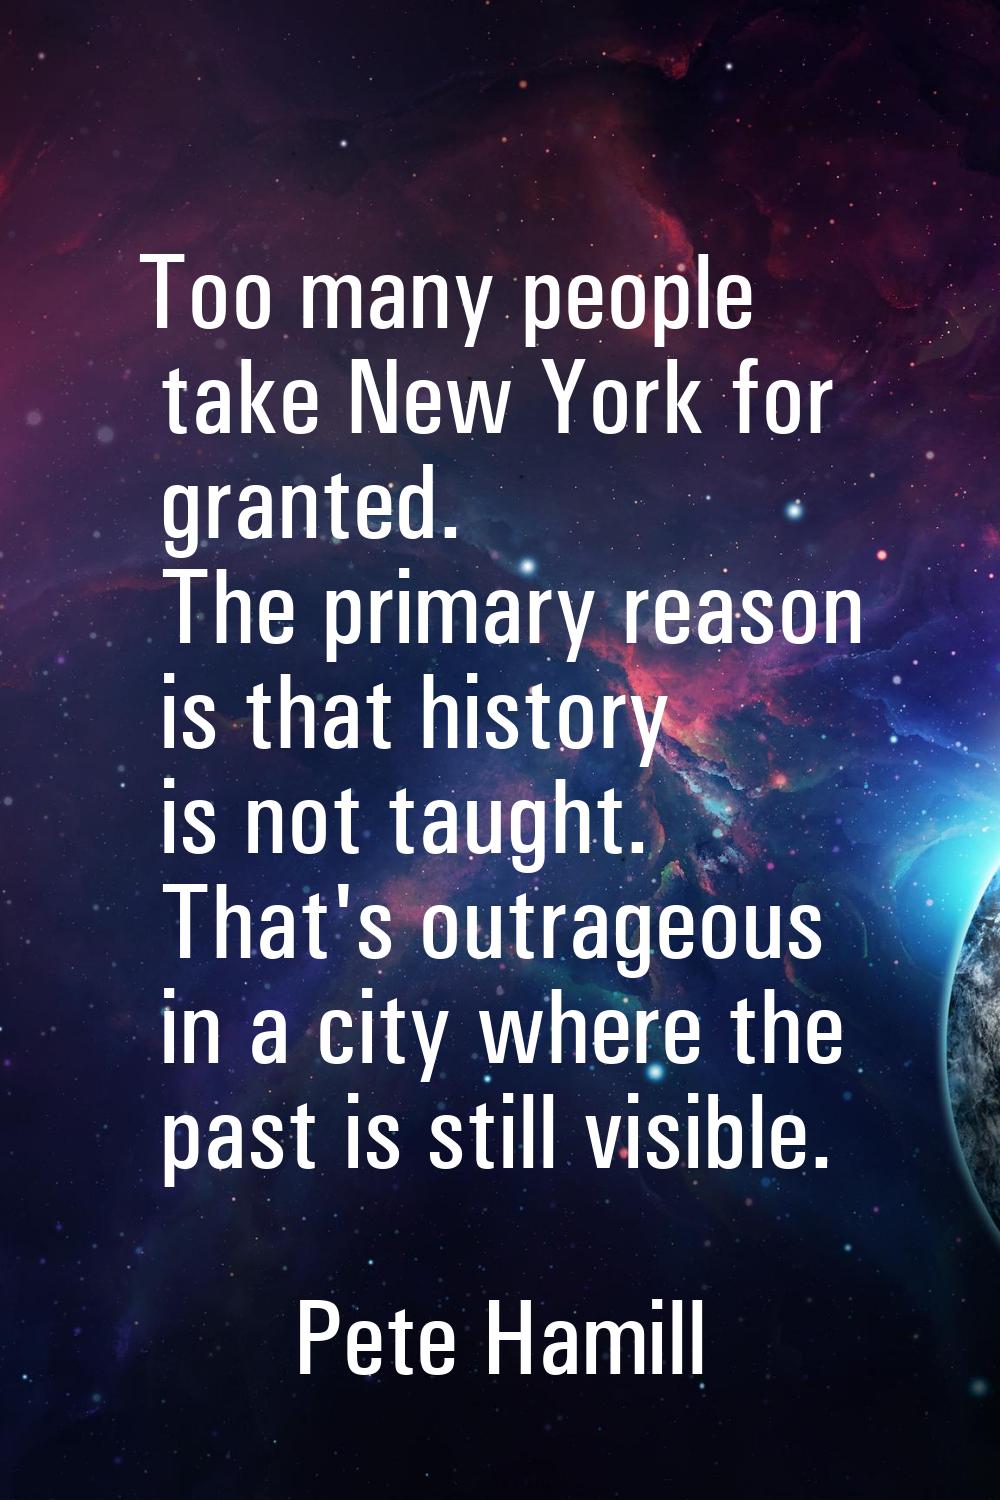 Too many people take New York for granted. The primary reason is that history is not taught. That's